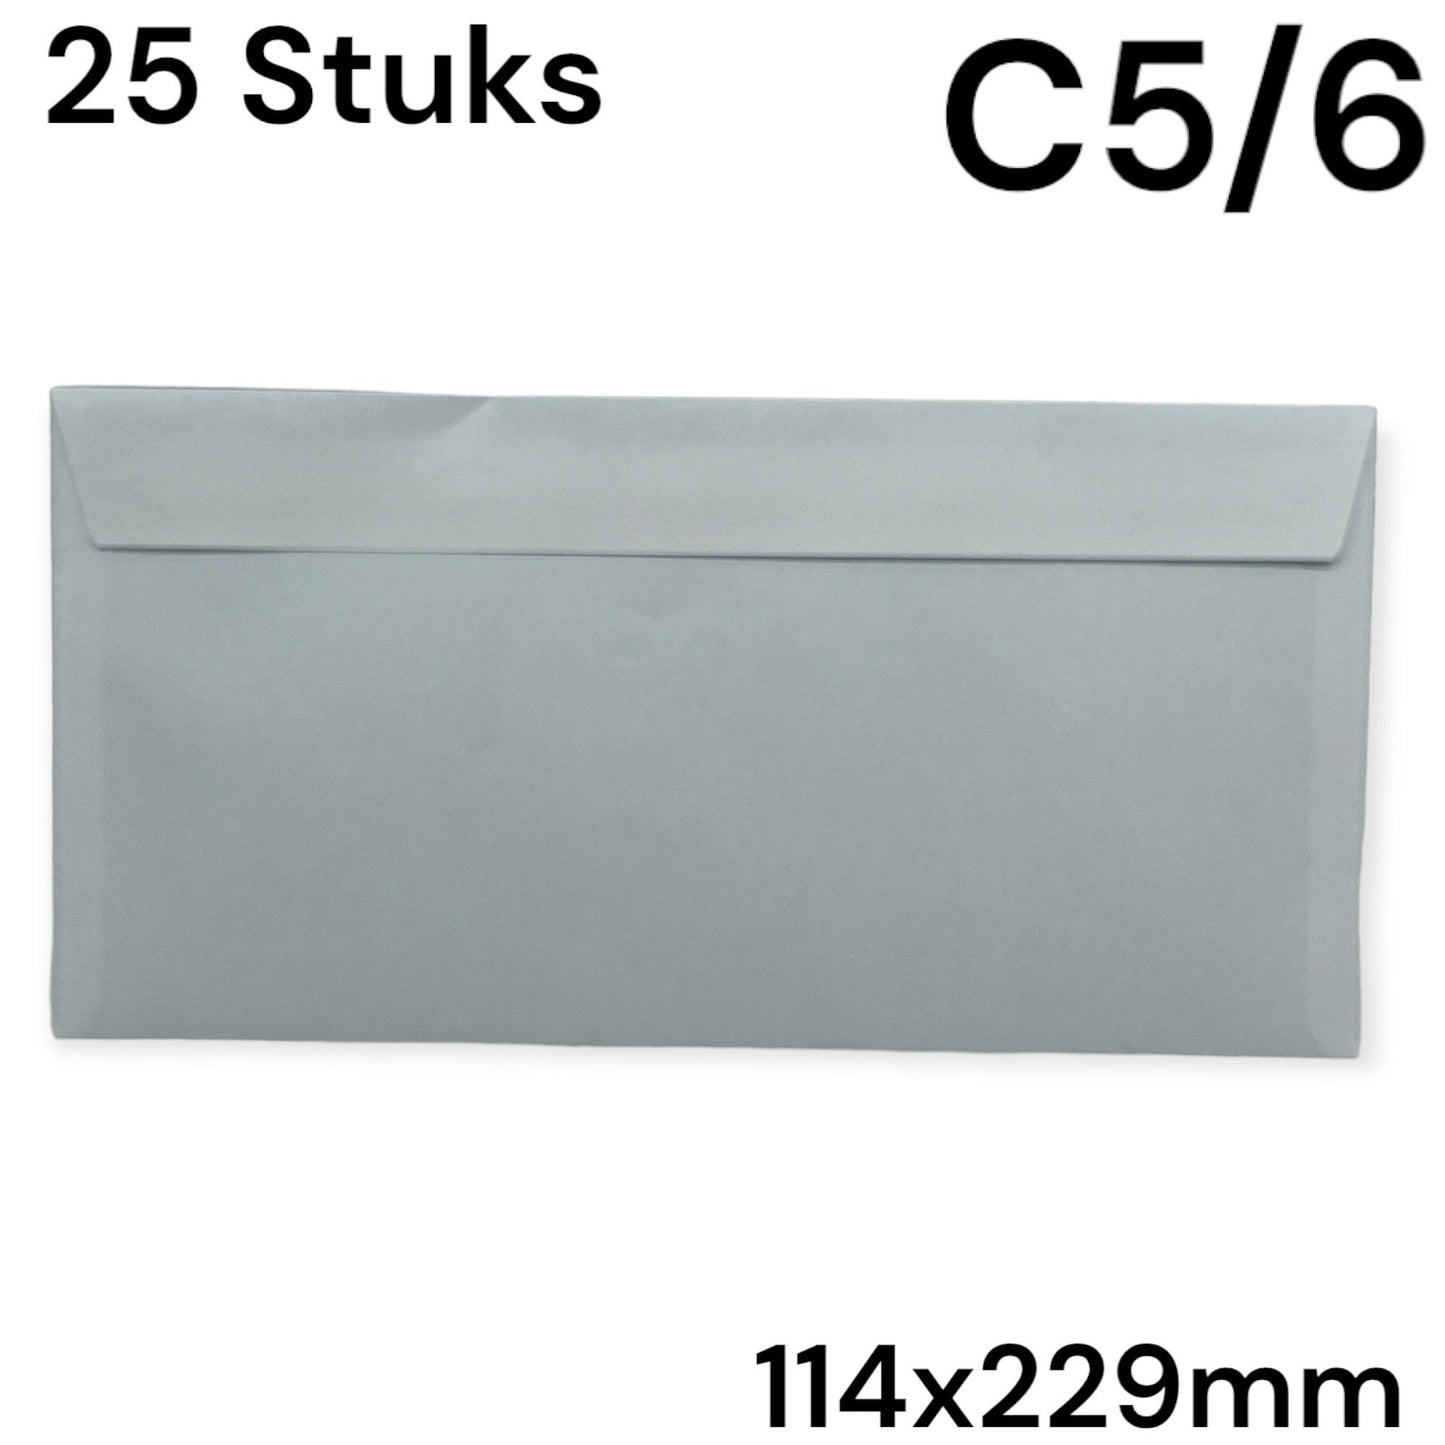 Timmy Toys - VD029 - C5/C6 Envelope - White - 114x229mm - 25 Pack - 1 Piece